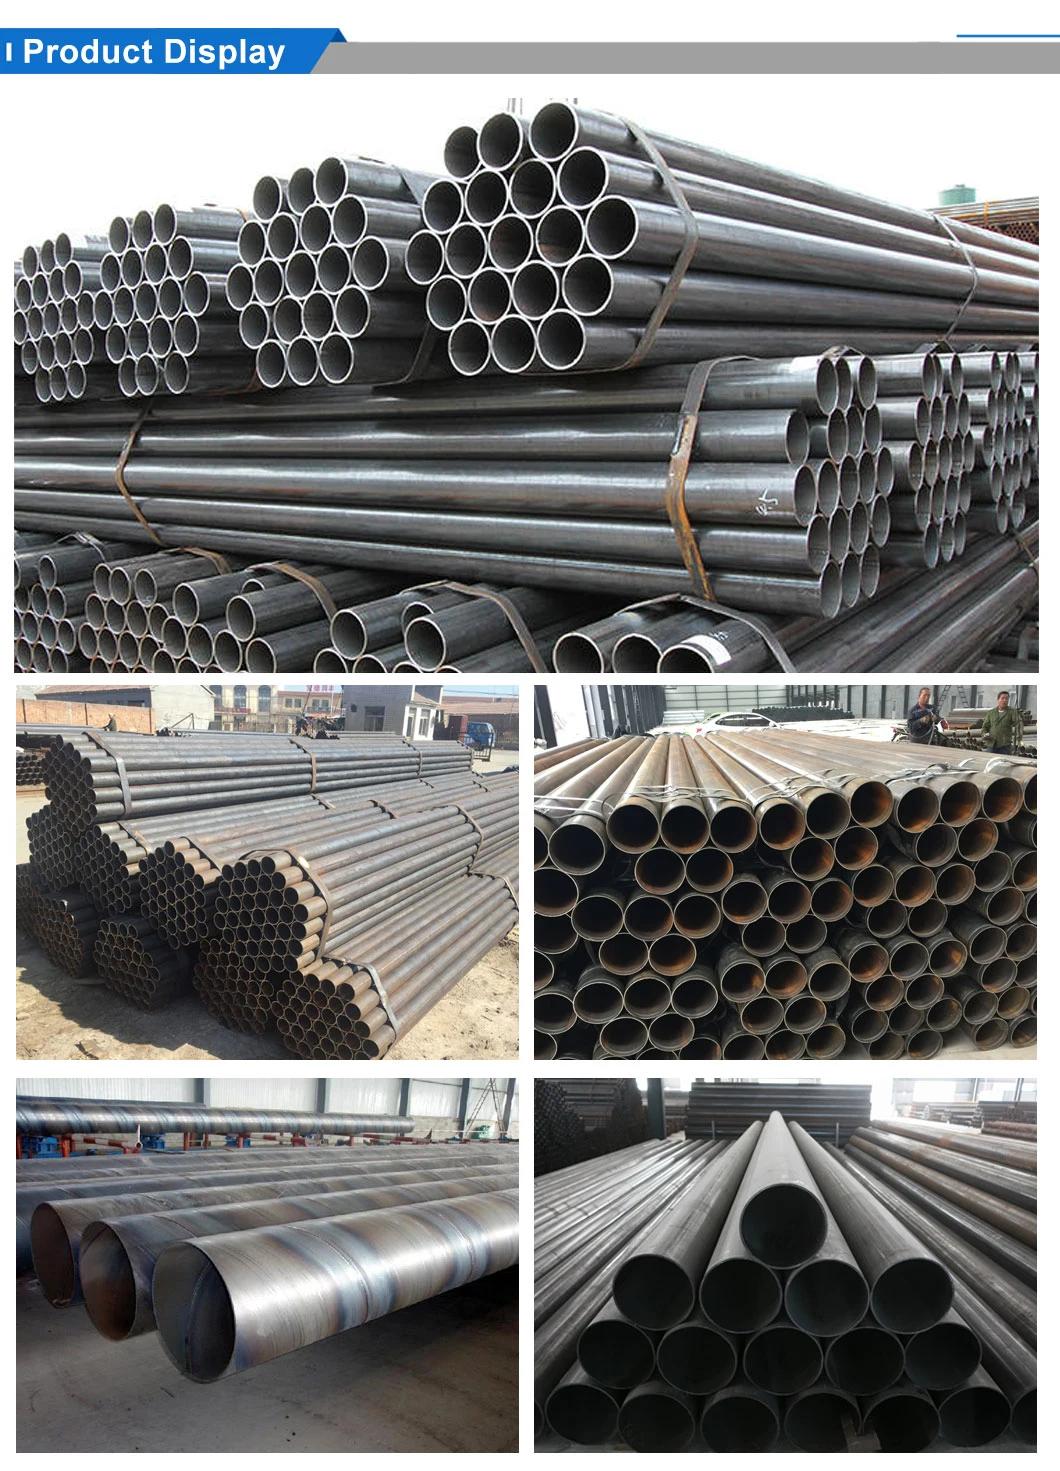 High Quality ASTM A106 Gr. B Seamless Carbon Steel Pipe